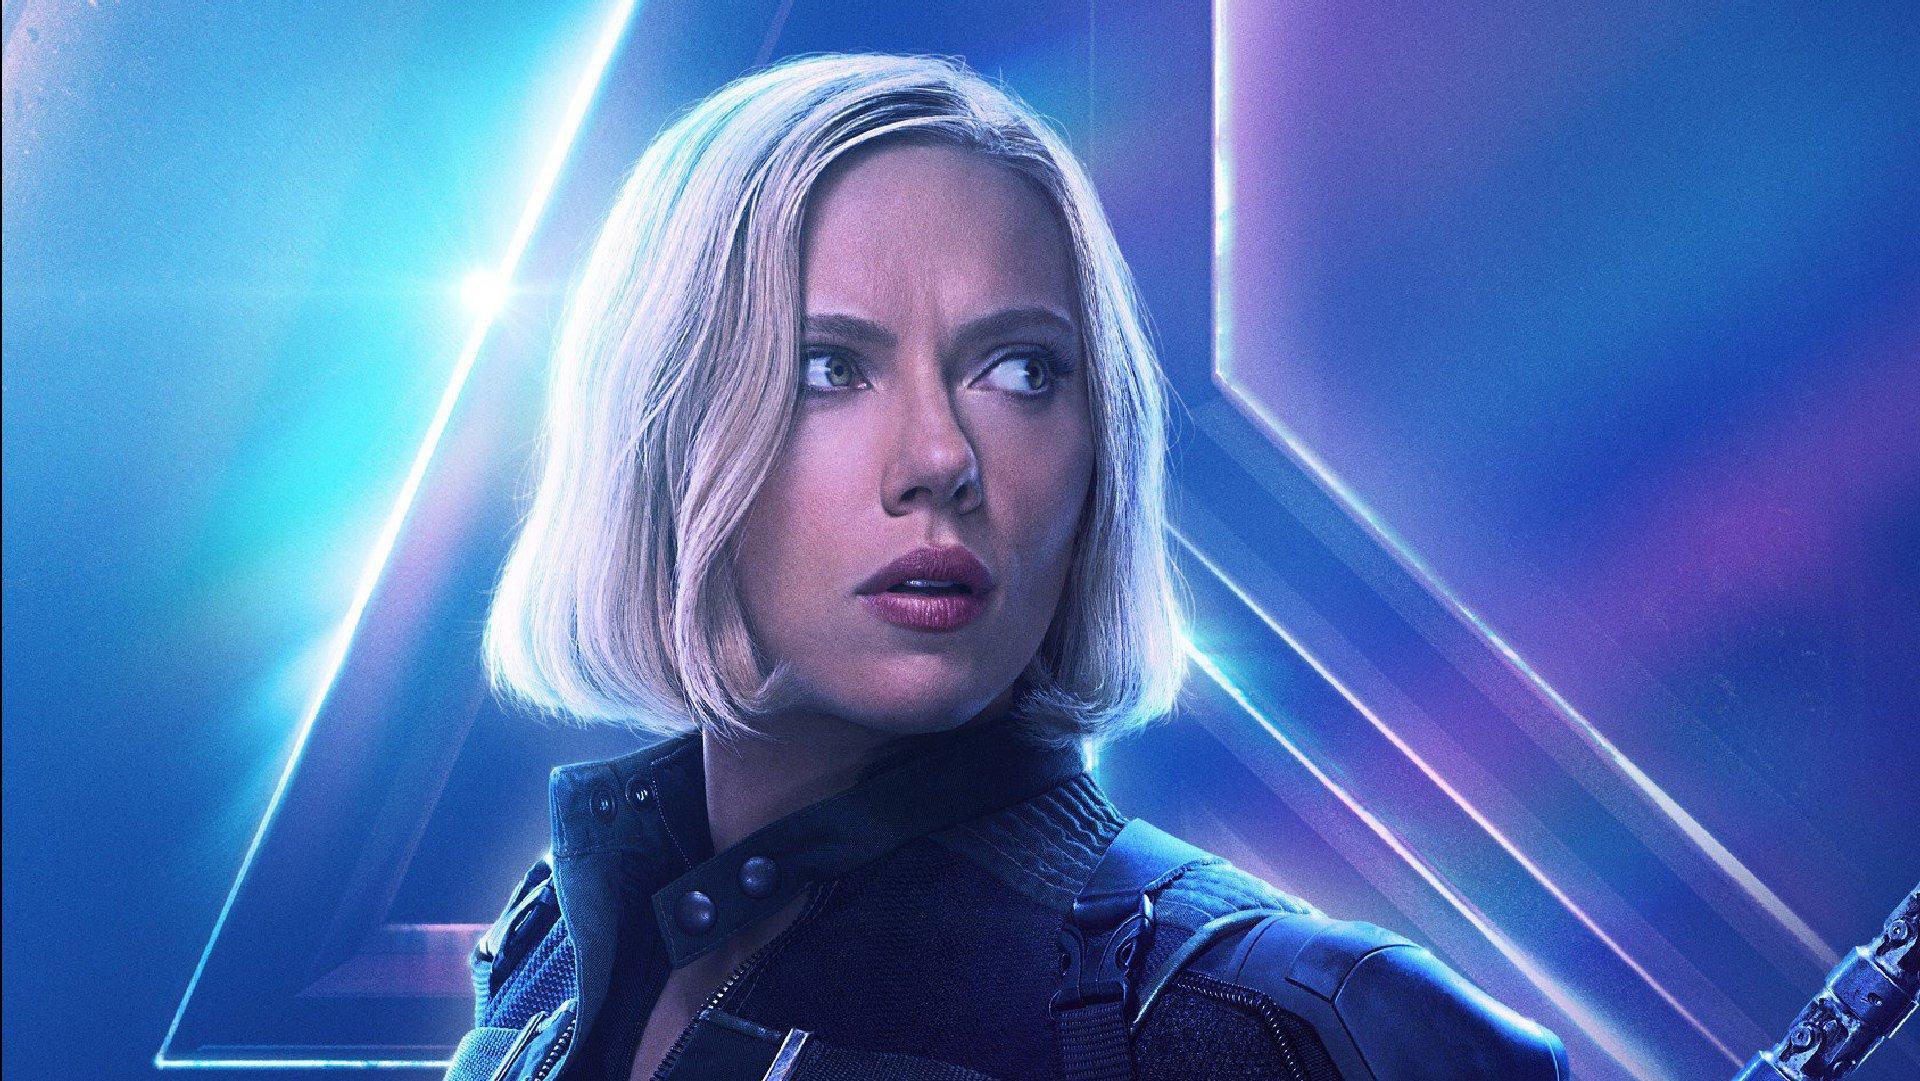 Avengers Infinity War, Black Widow Wallpapers for Phone and HD